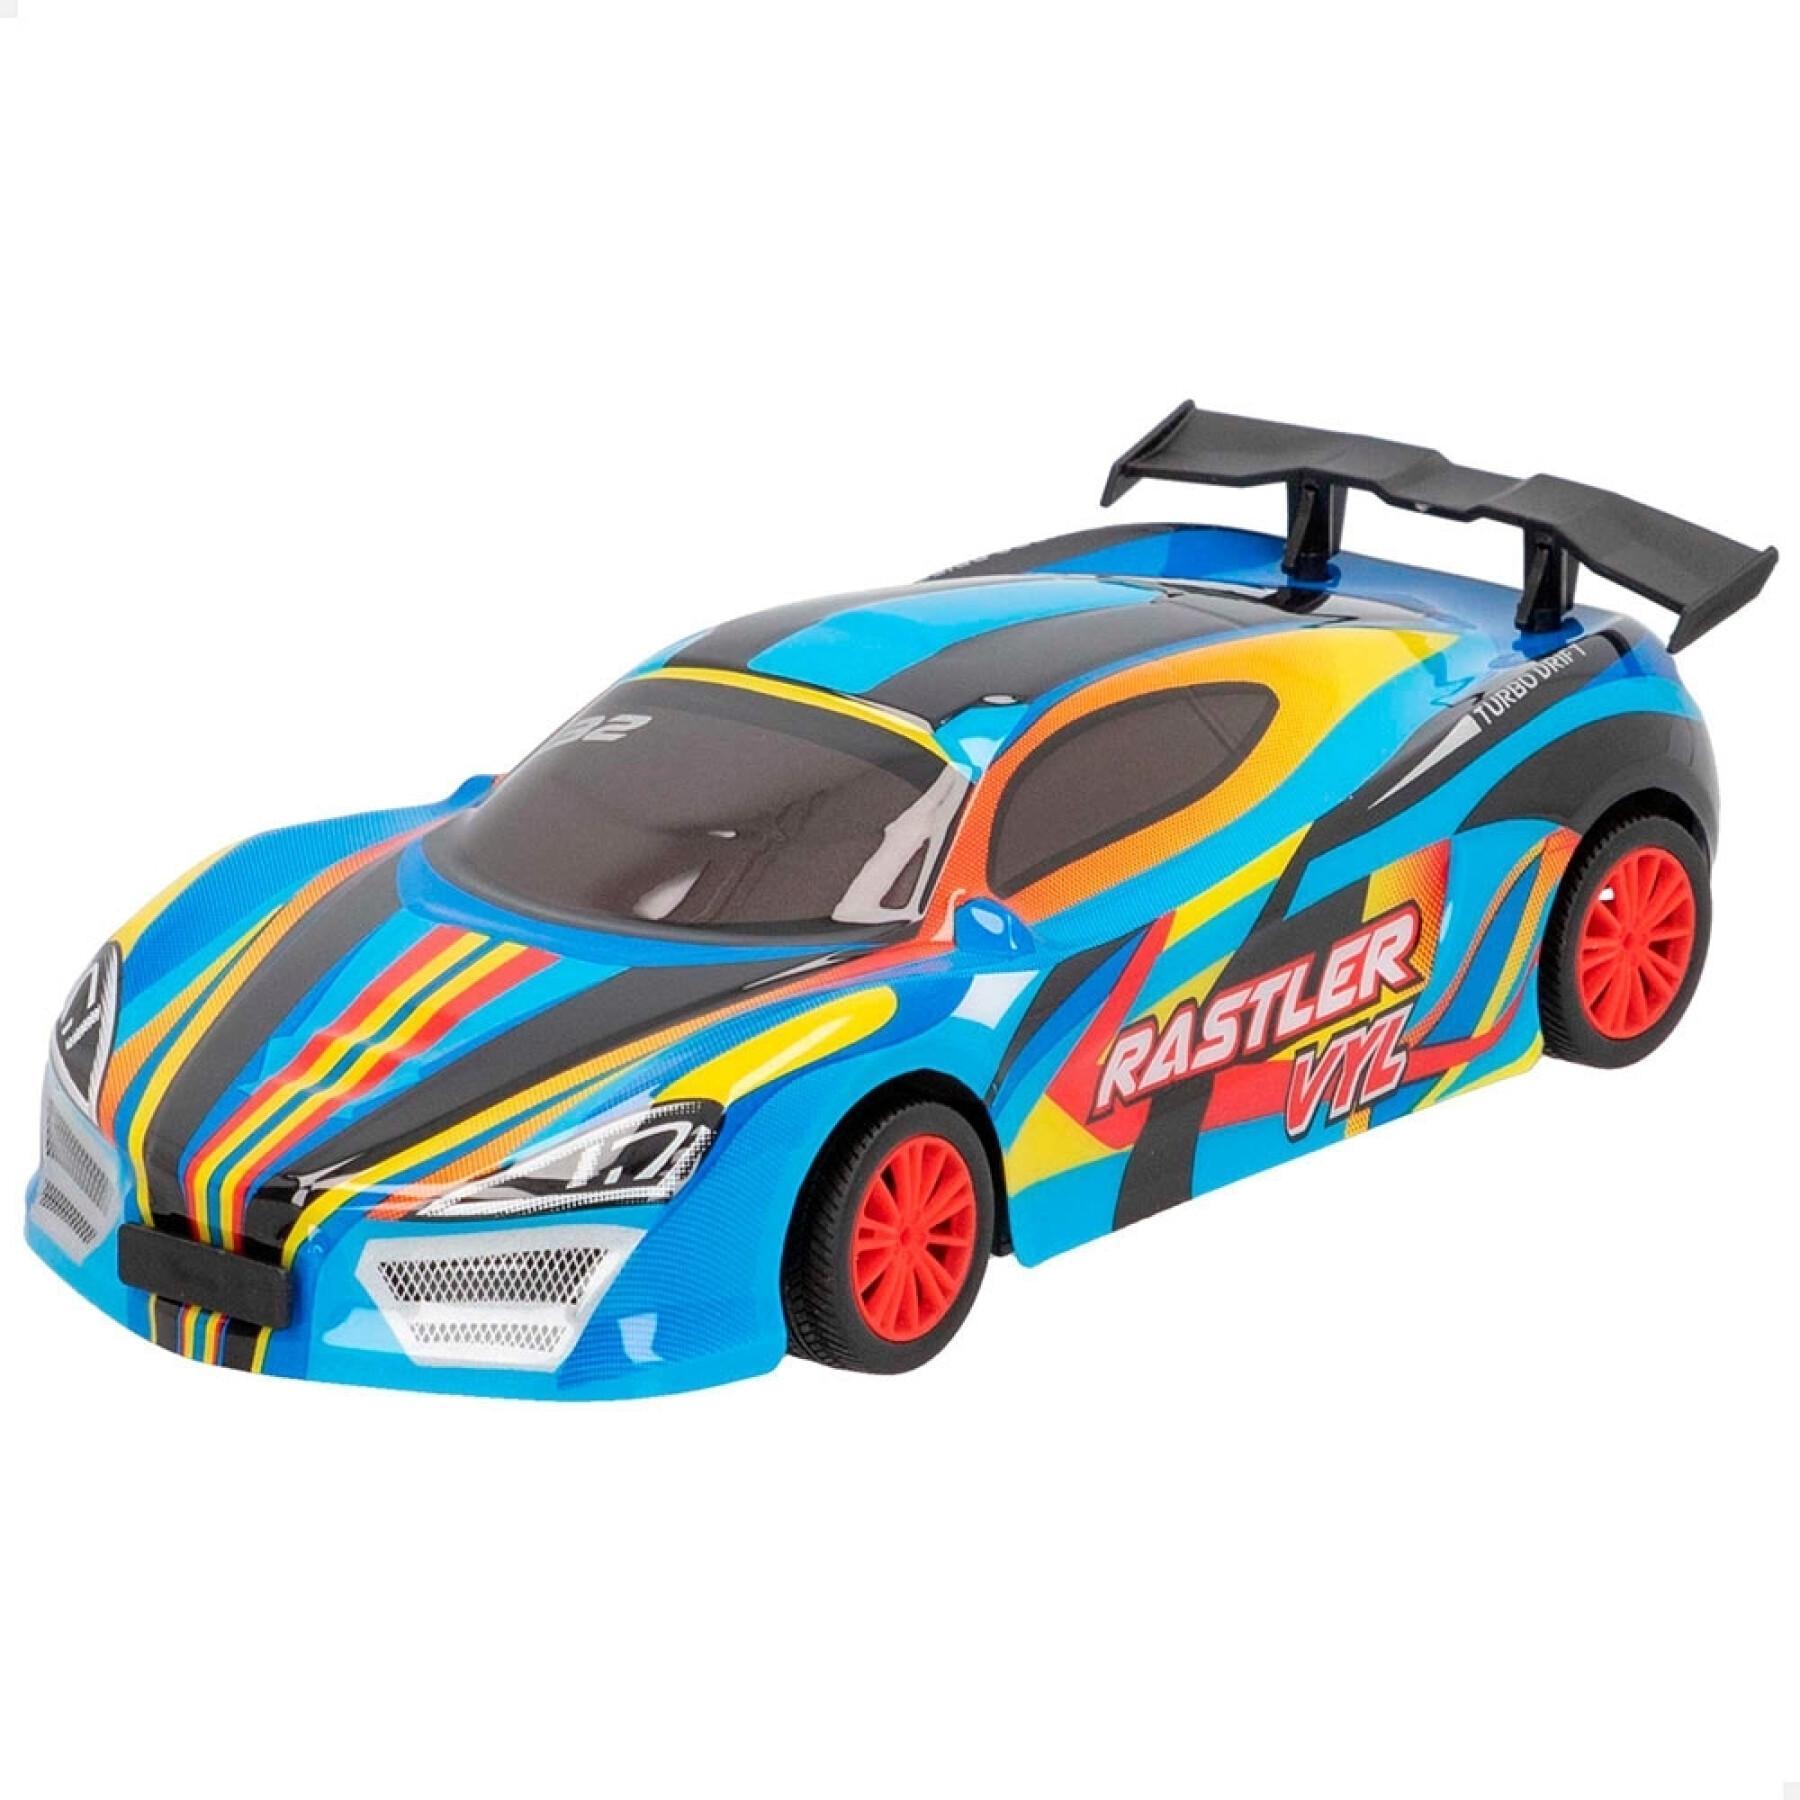 1:24 scale remote controlled car with lights Speed & Go